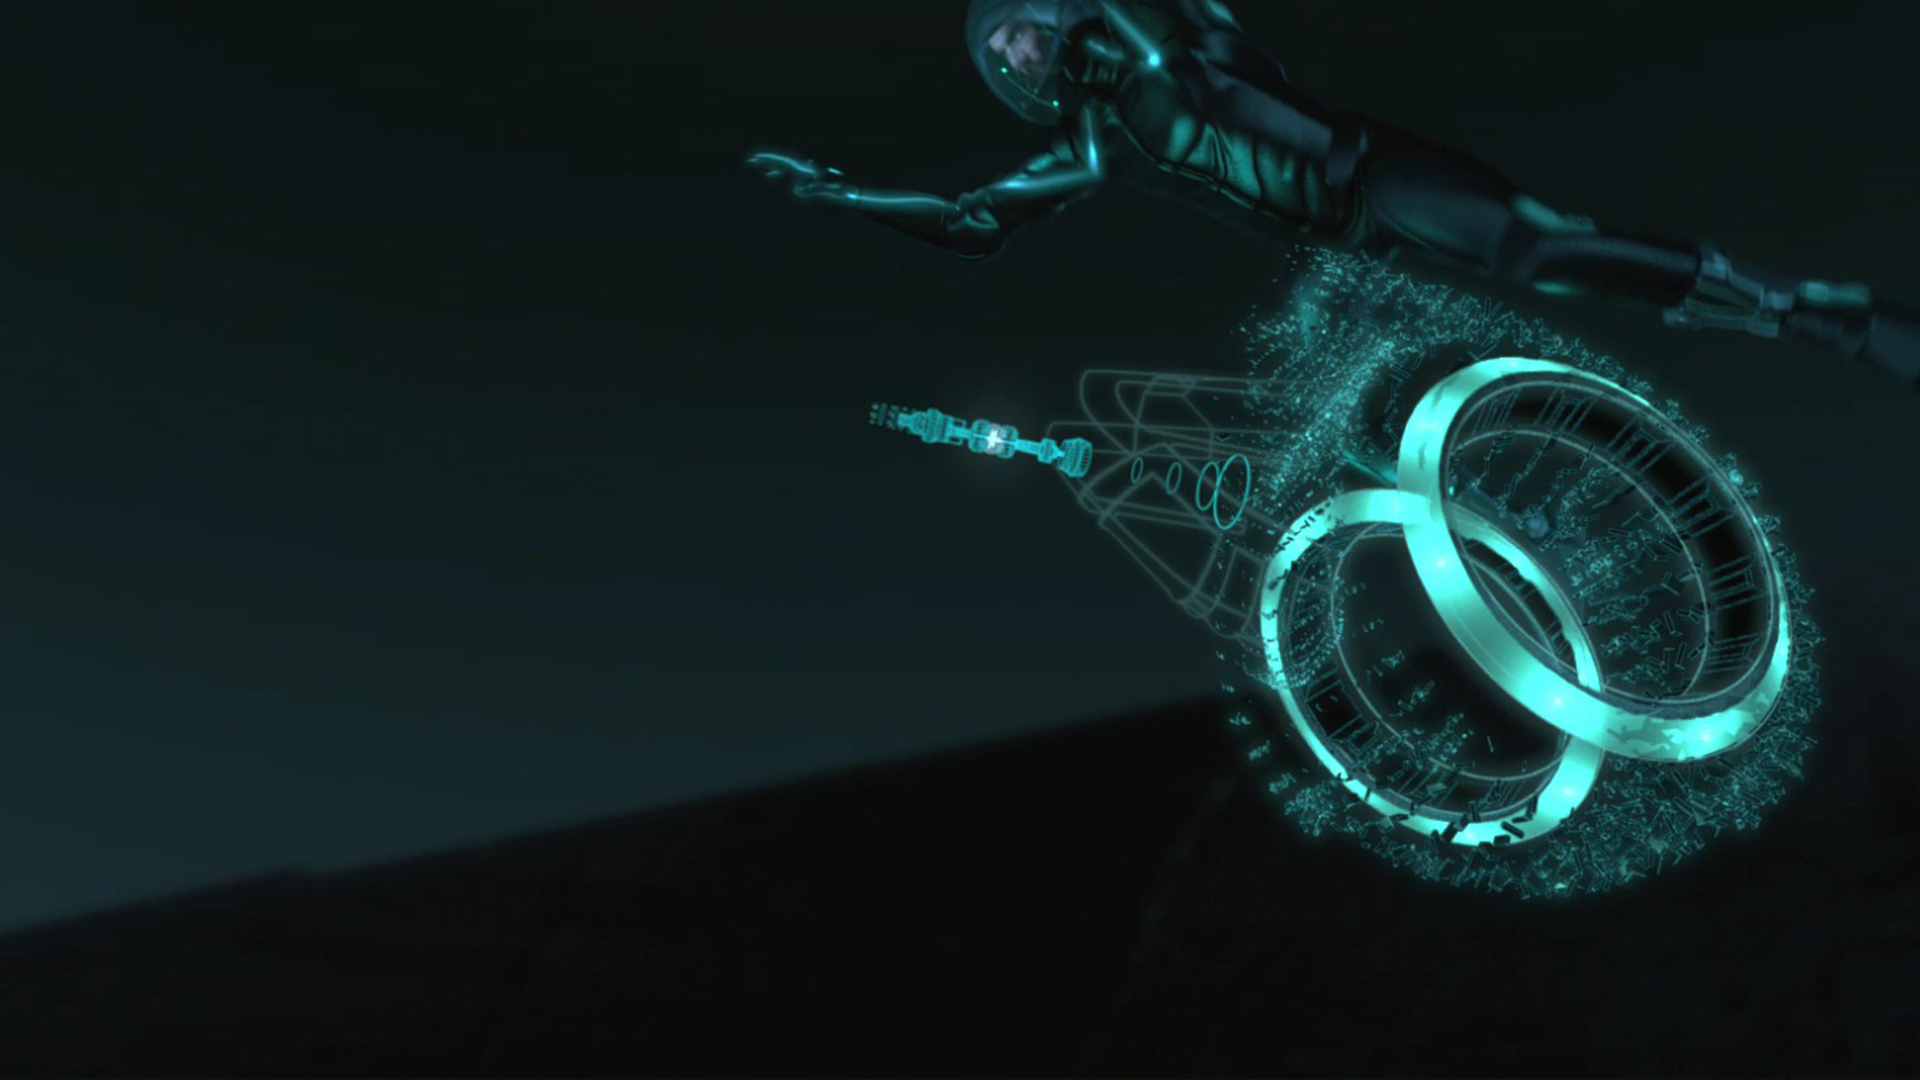 Tron Legacy Free Desktop Wallpapers for HD Widescreen and Mobile